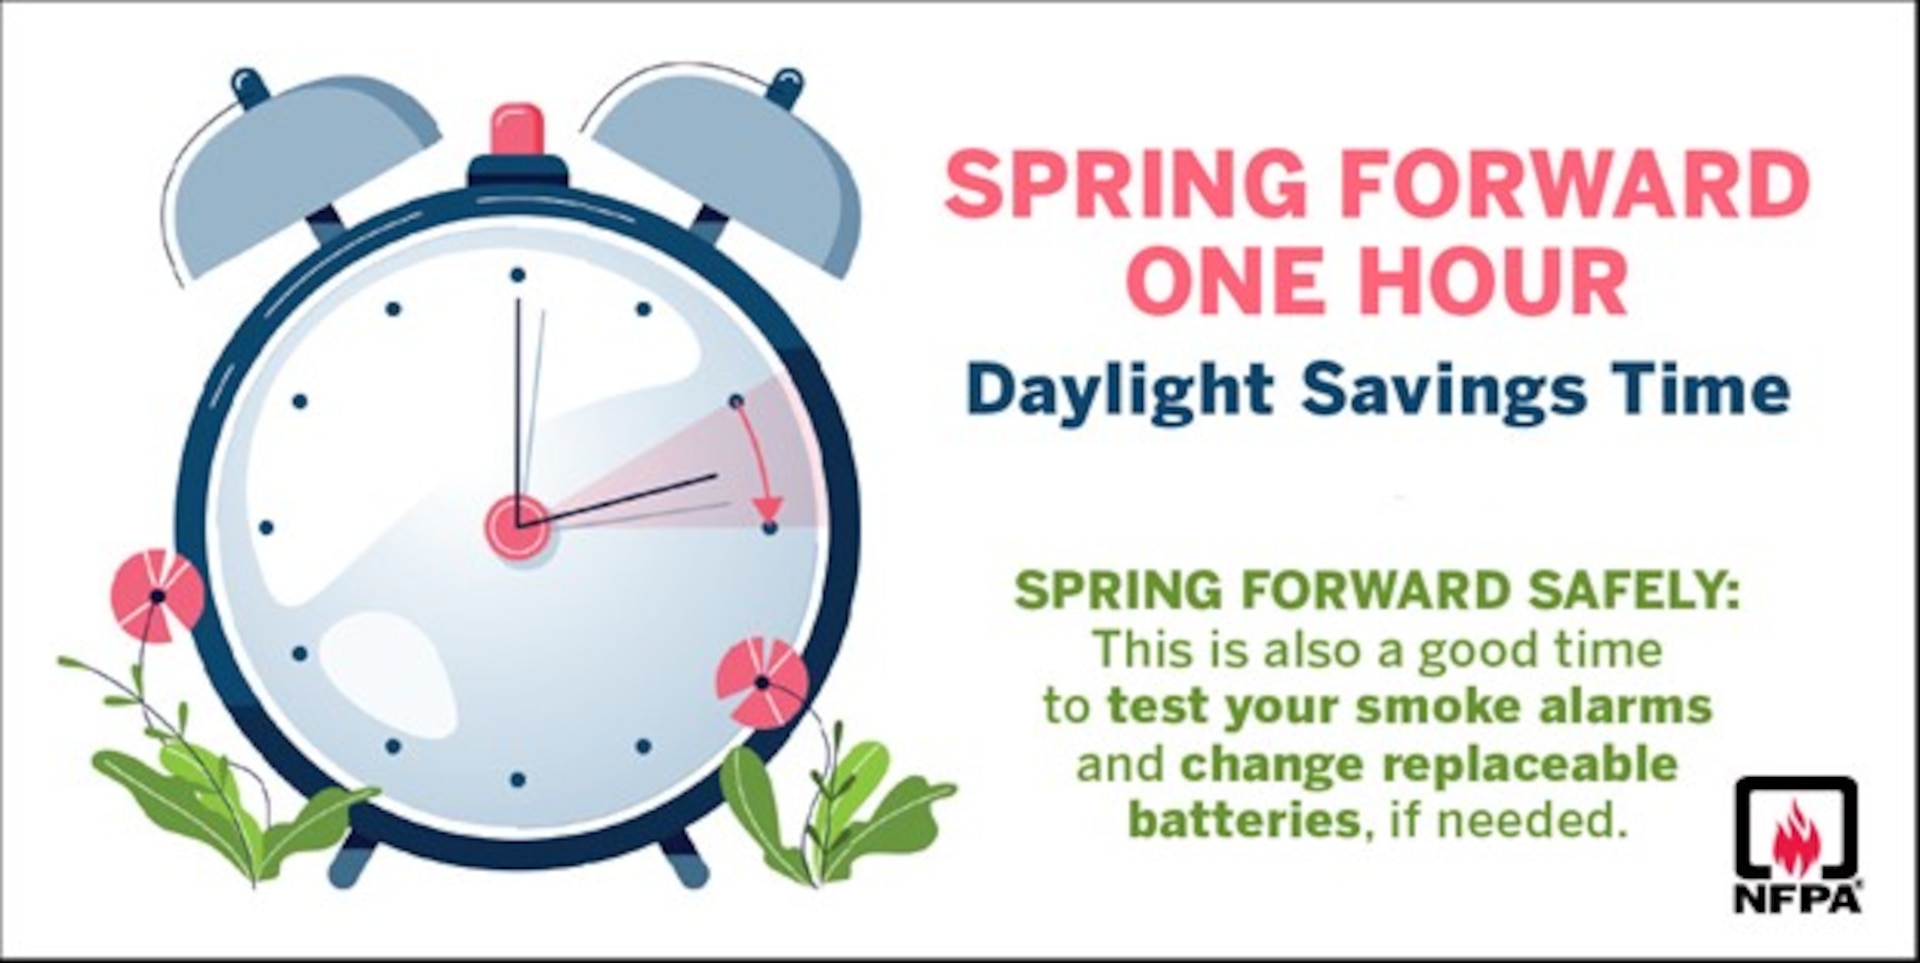 Daylight saving time: Spring forward this Sunday > Defense Logistics Agency  > News Article View